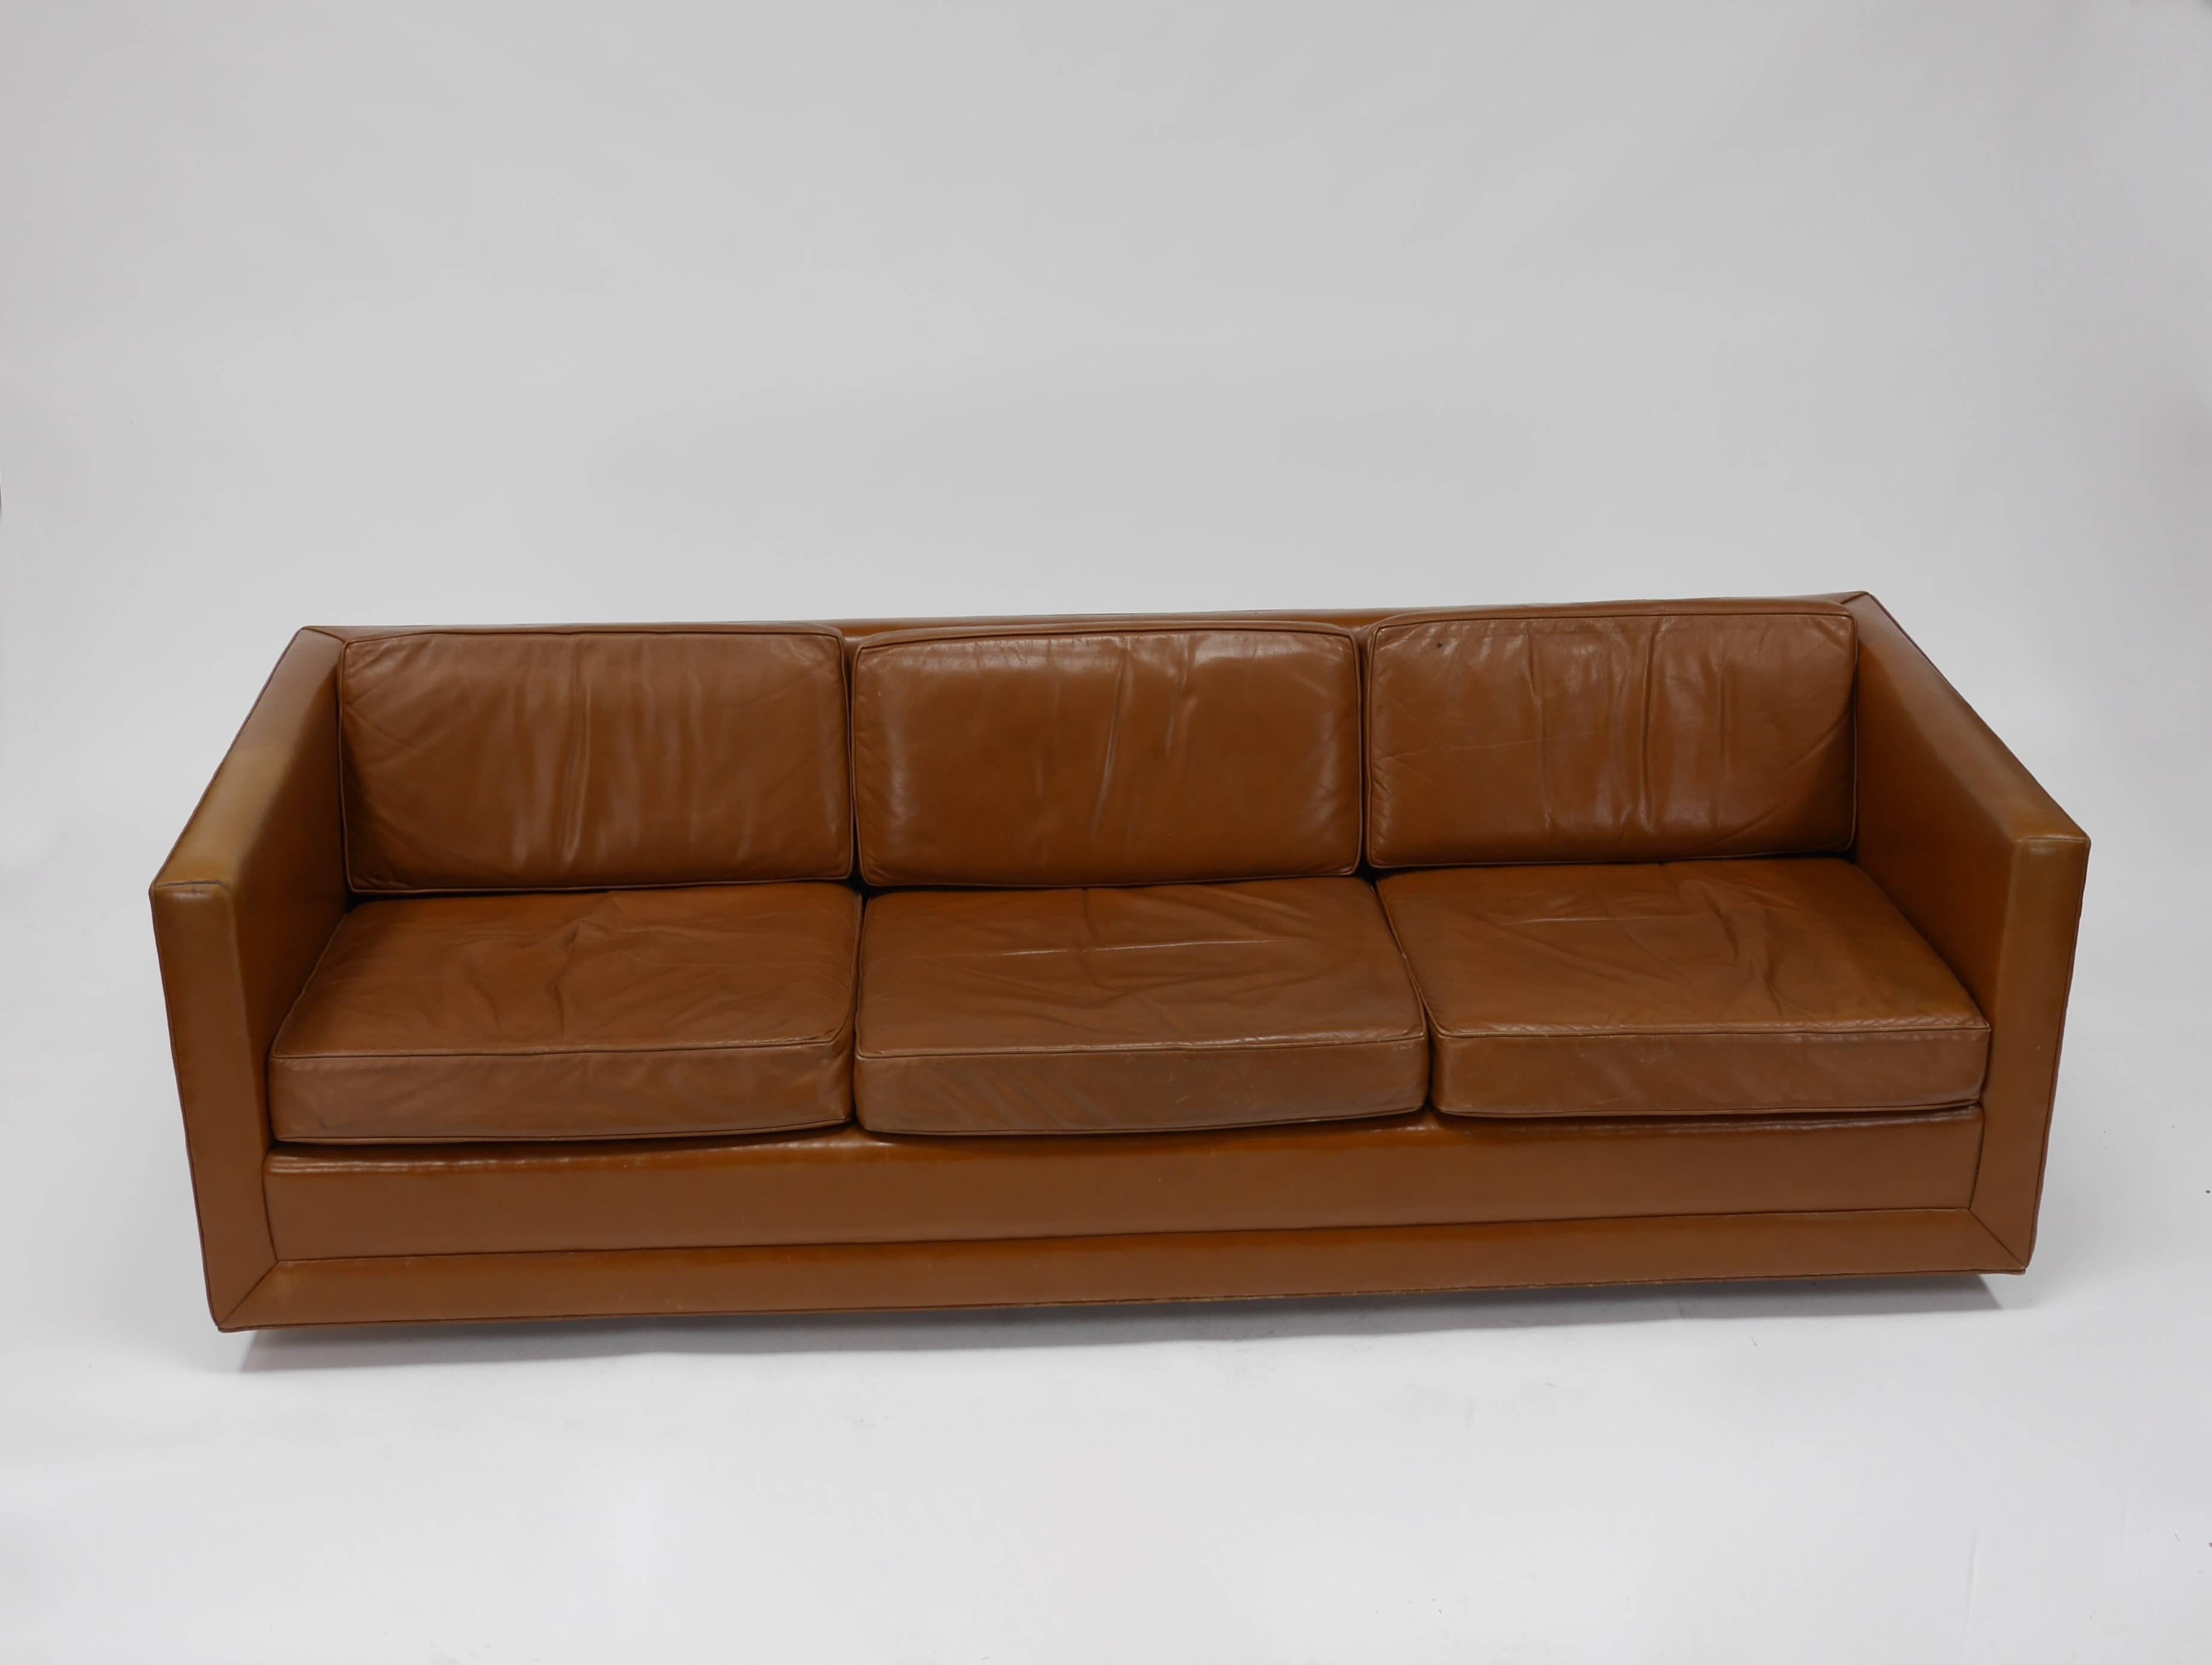 Leather tuxedo sofa by Harvey Probber. Original saddle leather upholstery. Walnut dowel legs. Patina  similar to that of a Classic leather club chair. Call or email for detailed condition report. Labeled Harvey Probber.